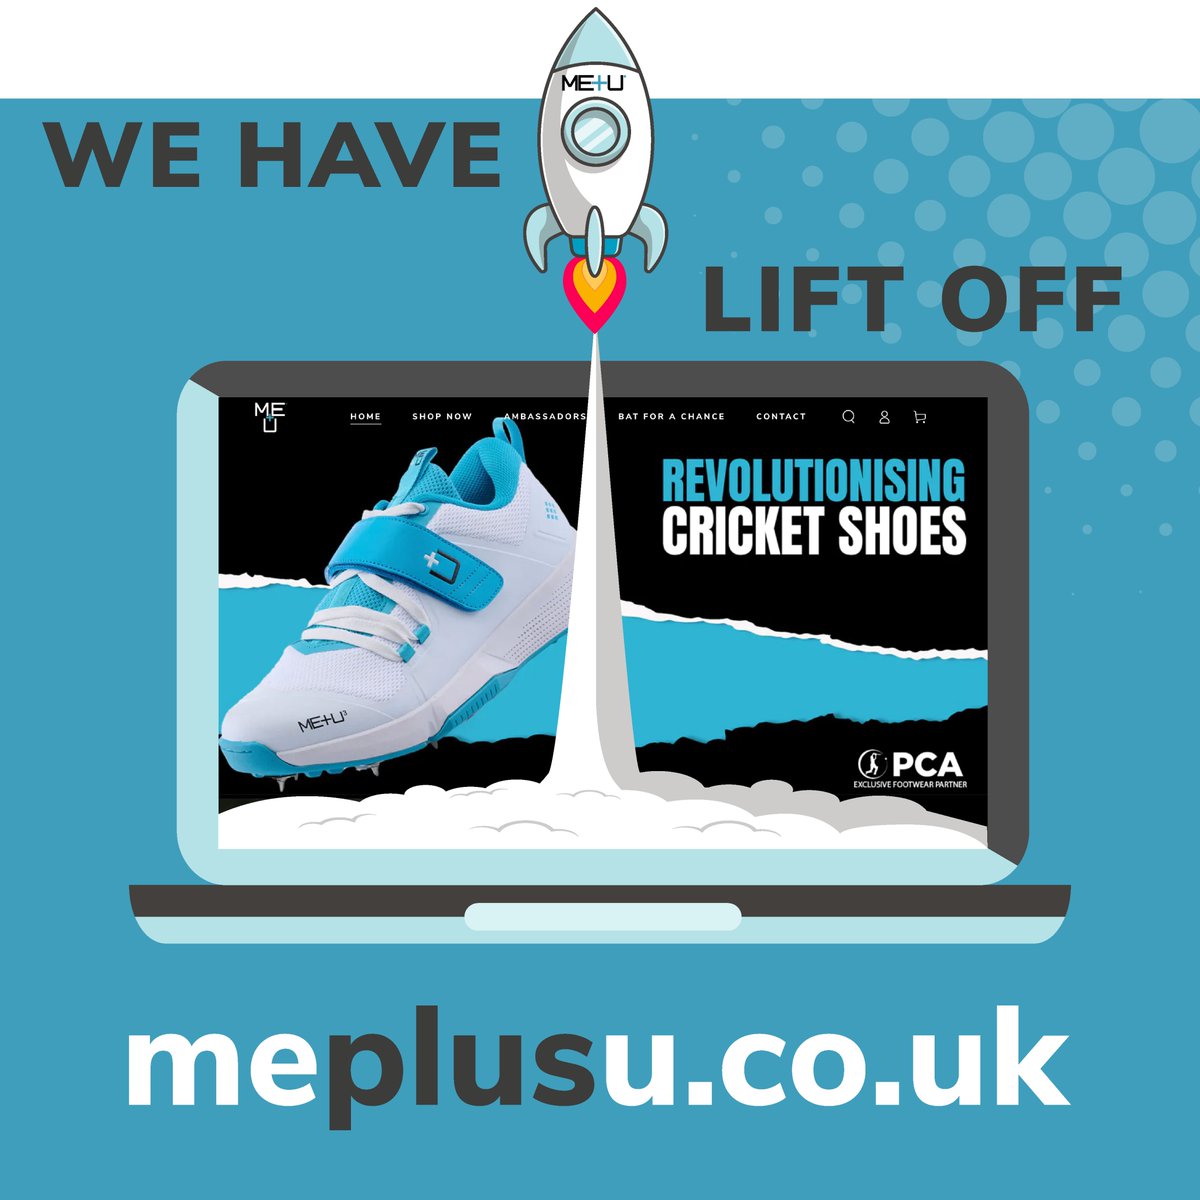 We are thrilled to announce our shiny new website is now live. The ME+U team are extremely proud and excited to share with you our innovation in cricket footwear. Please do have a browse and share this post to any of your cricket lovers. meplusu.co.uk